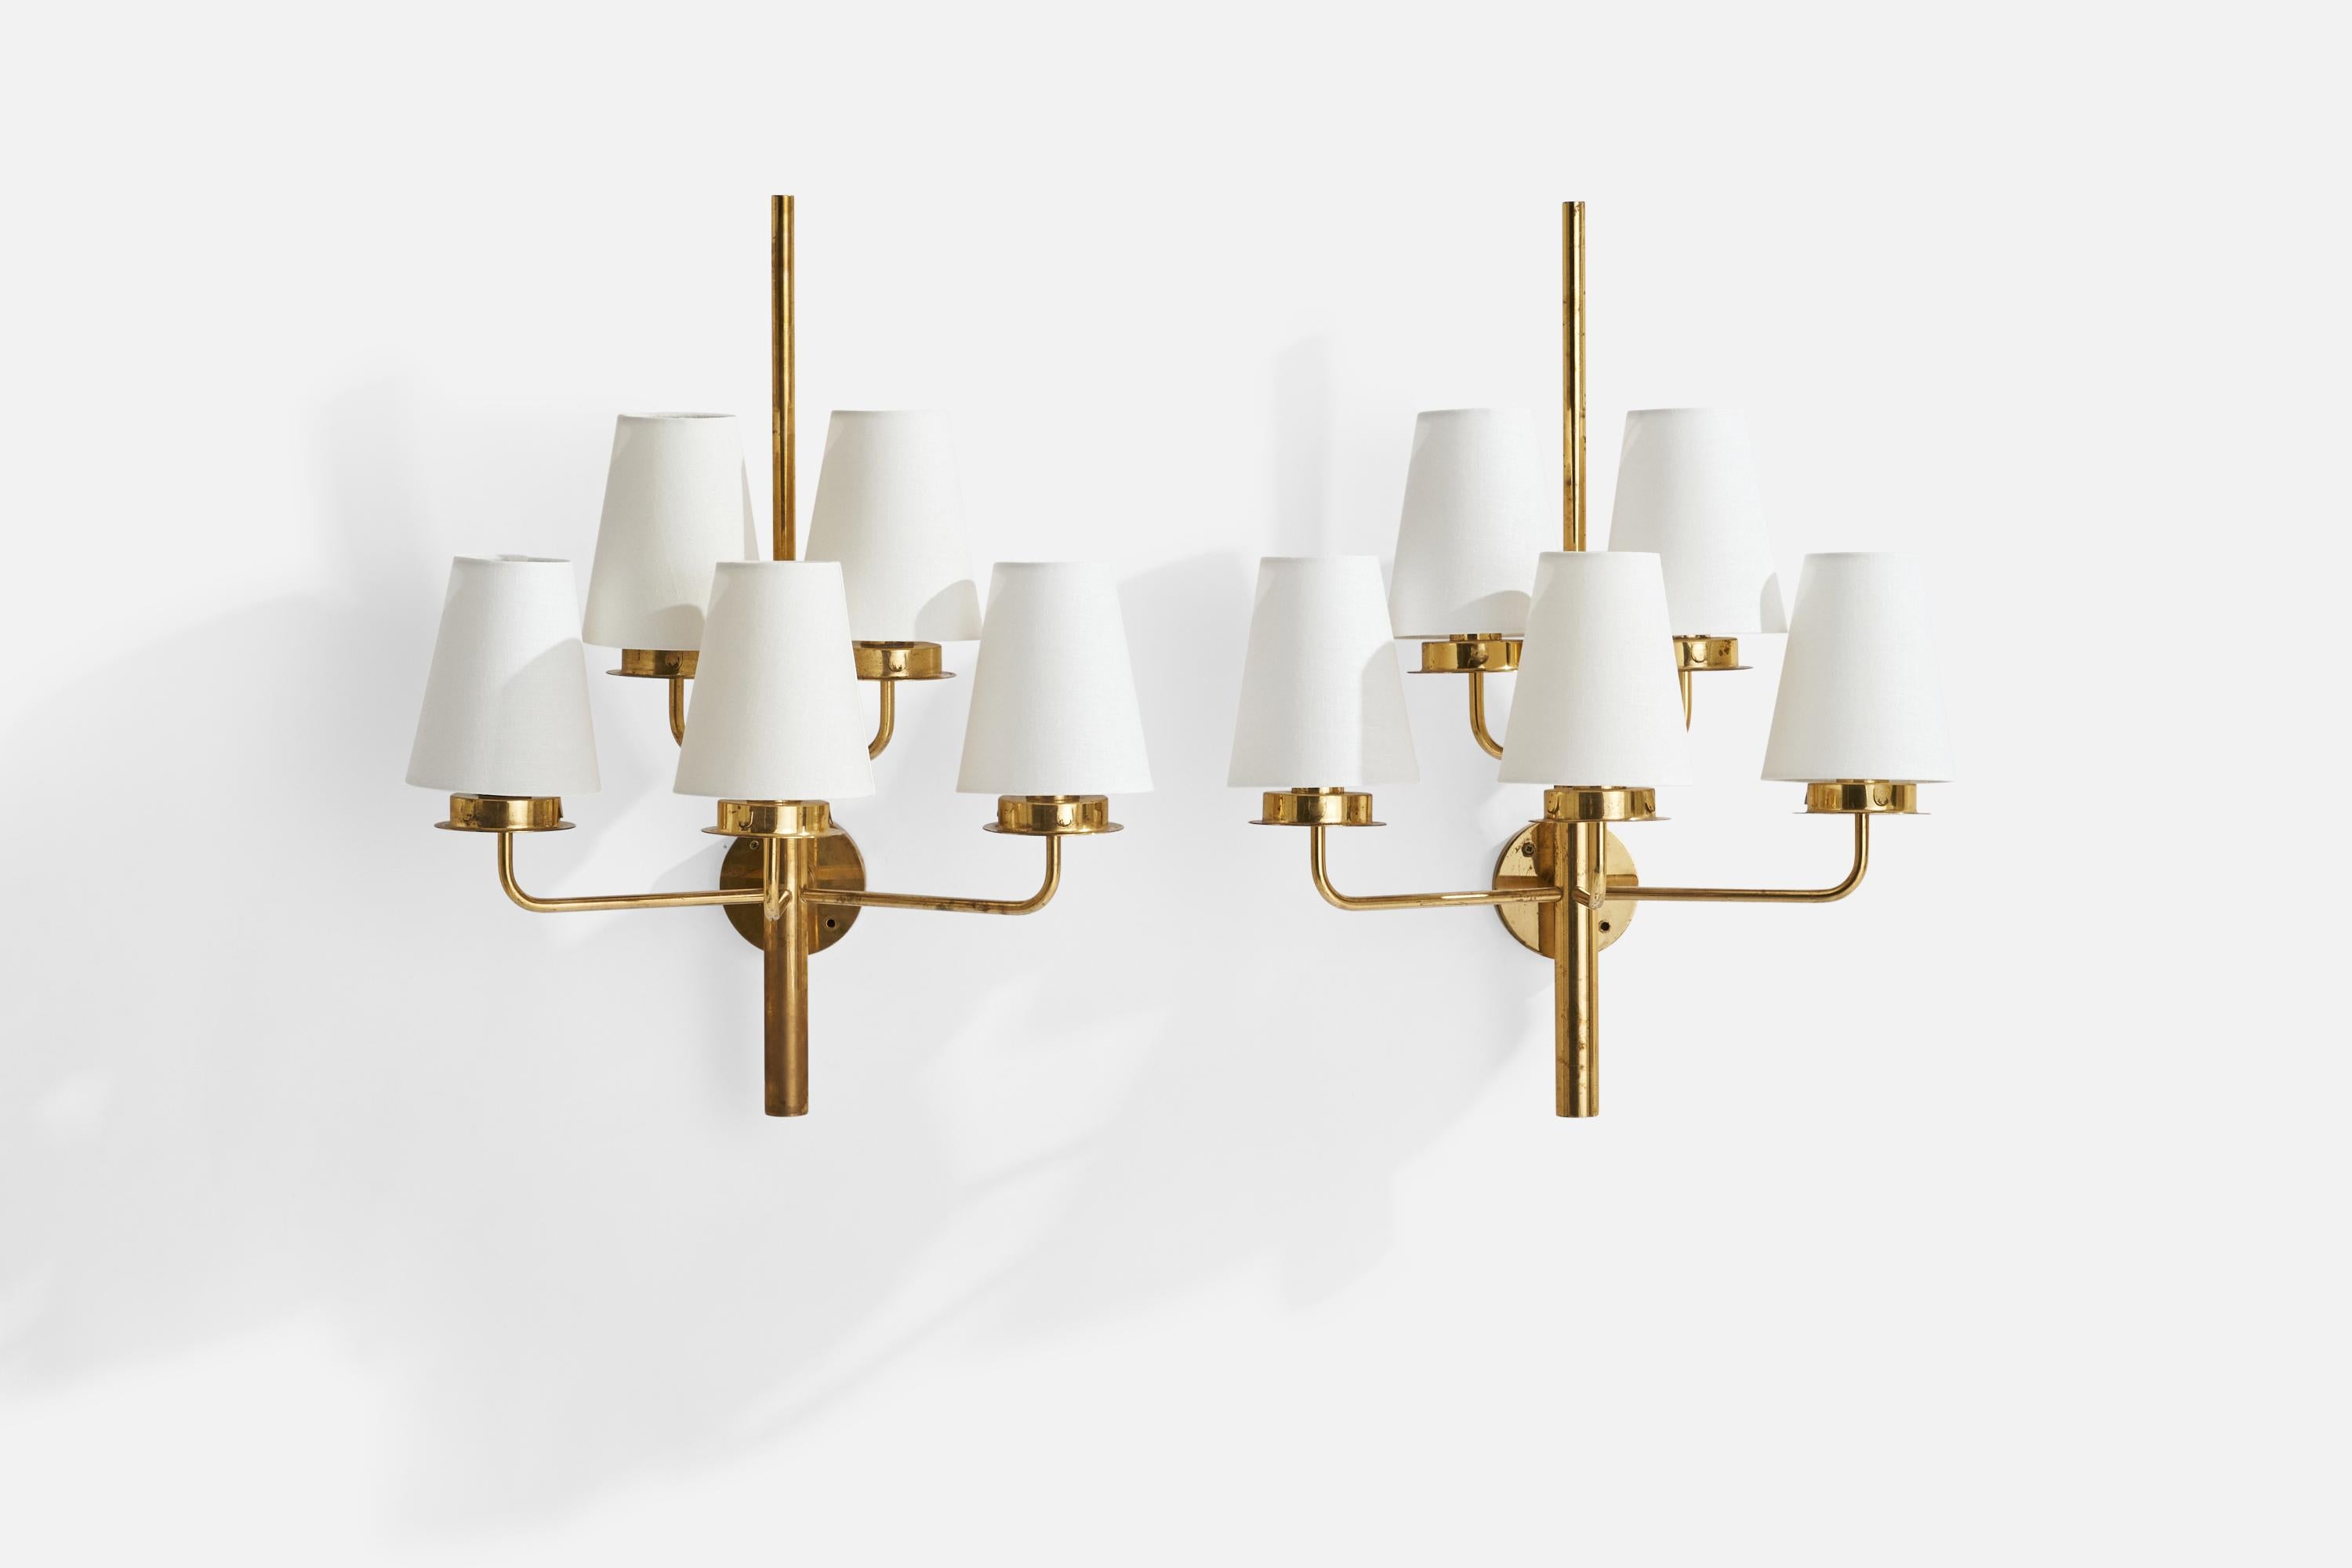 A pair of sizeable five armed brass and white fabric wall light designed and produced by Hans-Agne Jakobsson, Markaryd, Sweden, 1960s.

Overall Dimensions (inches): 24.25”H x 18” W x 10.5” D
Stated dimensions include shade.
Bulb Specifications: E-14